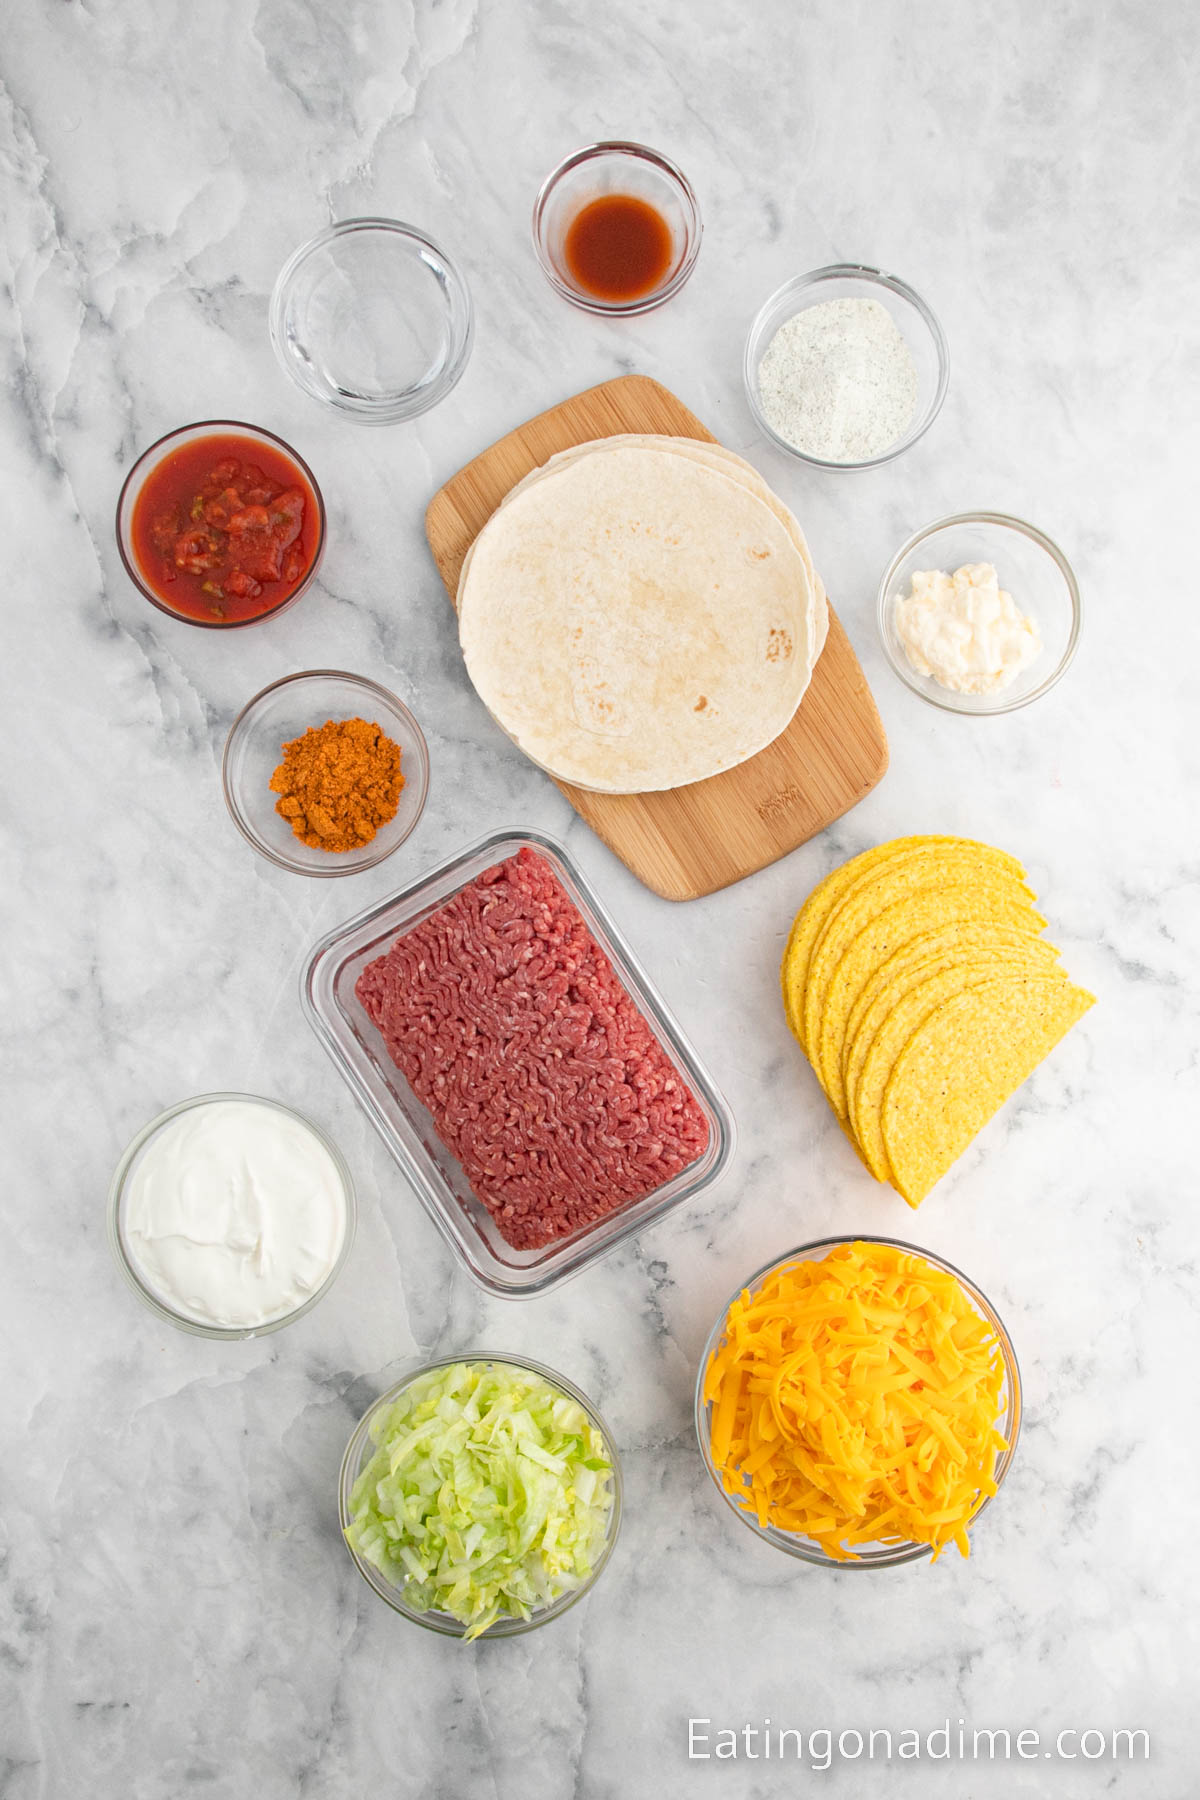 Ingredients needed for Taco Bell Cheesy Gordita Crunch - Ground Beef, taco seasoning, salsa, water, taco shells, cheese, flour tortillas, lettuce, sour cream, ranch seasoning mix, mayonnaise, hot sauce